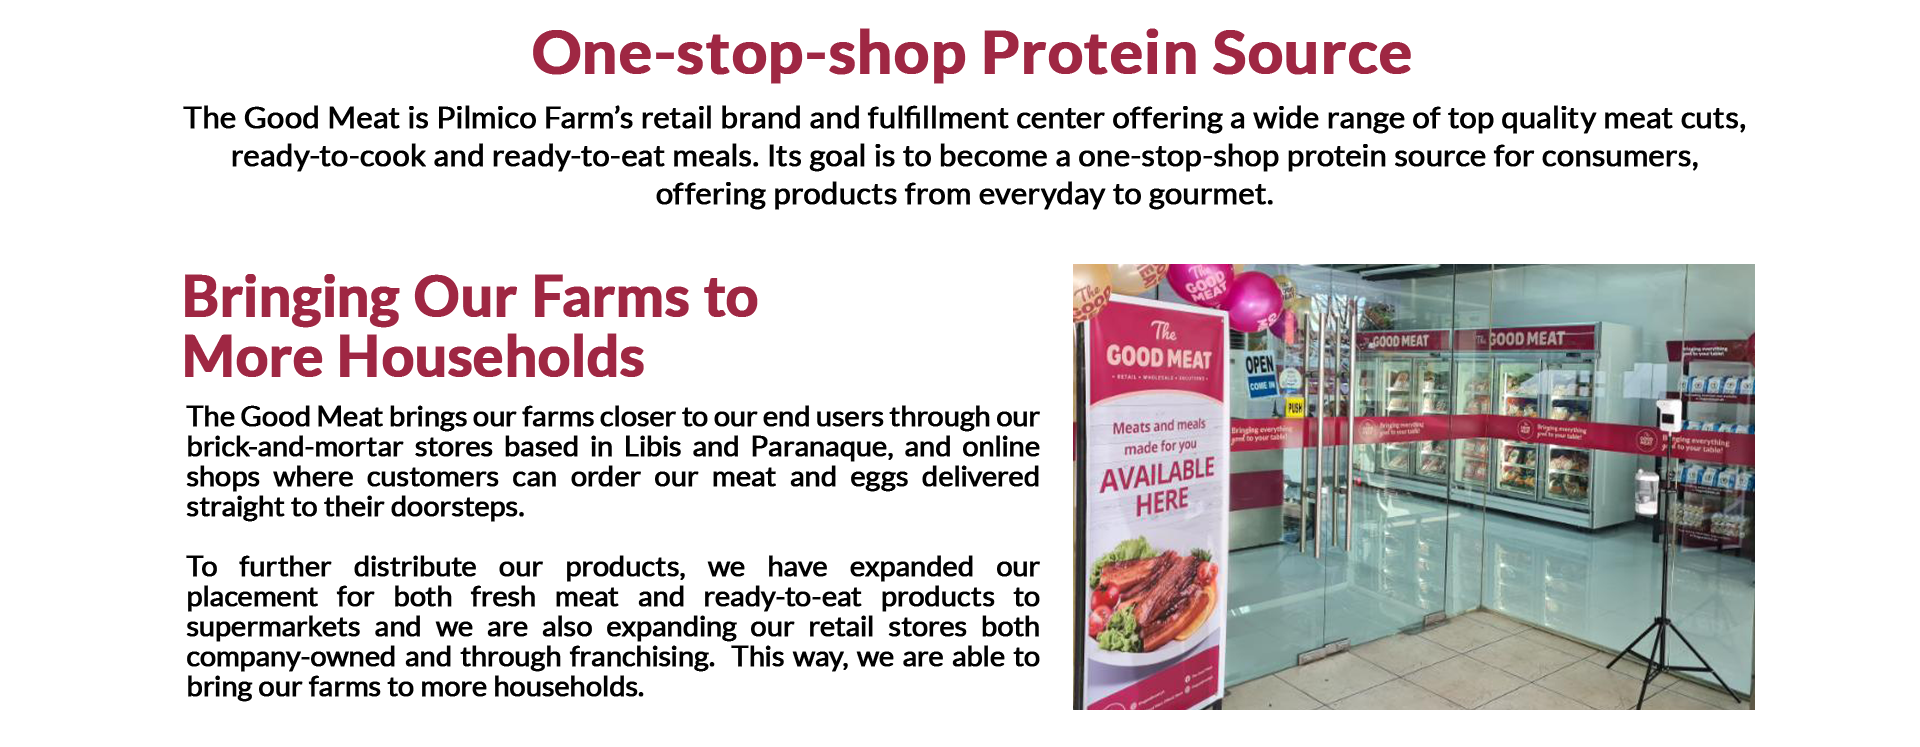 One Stop Shop Protein Source